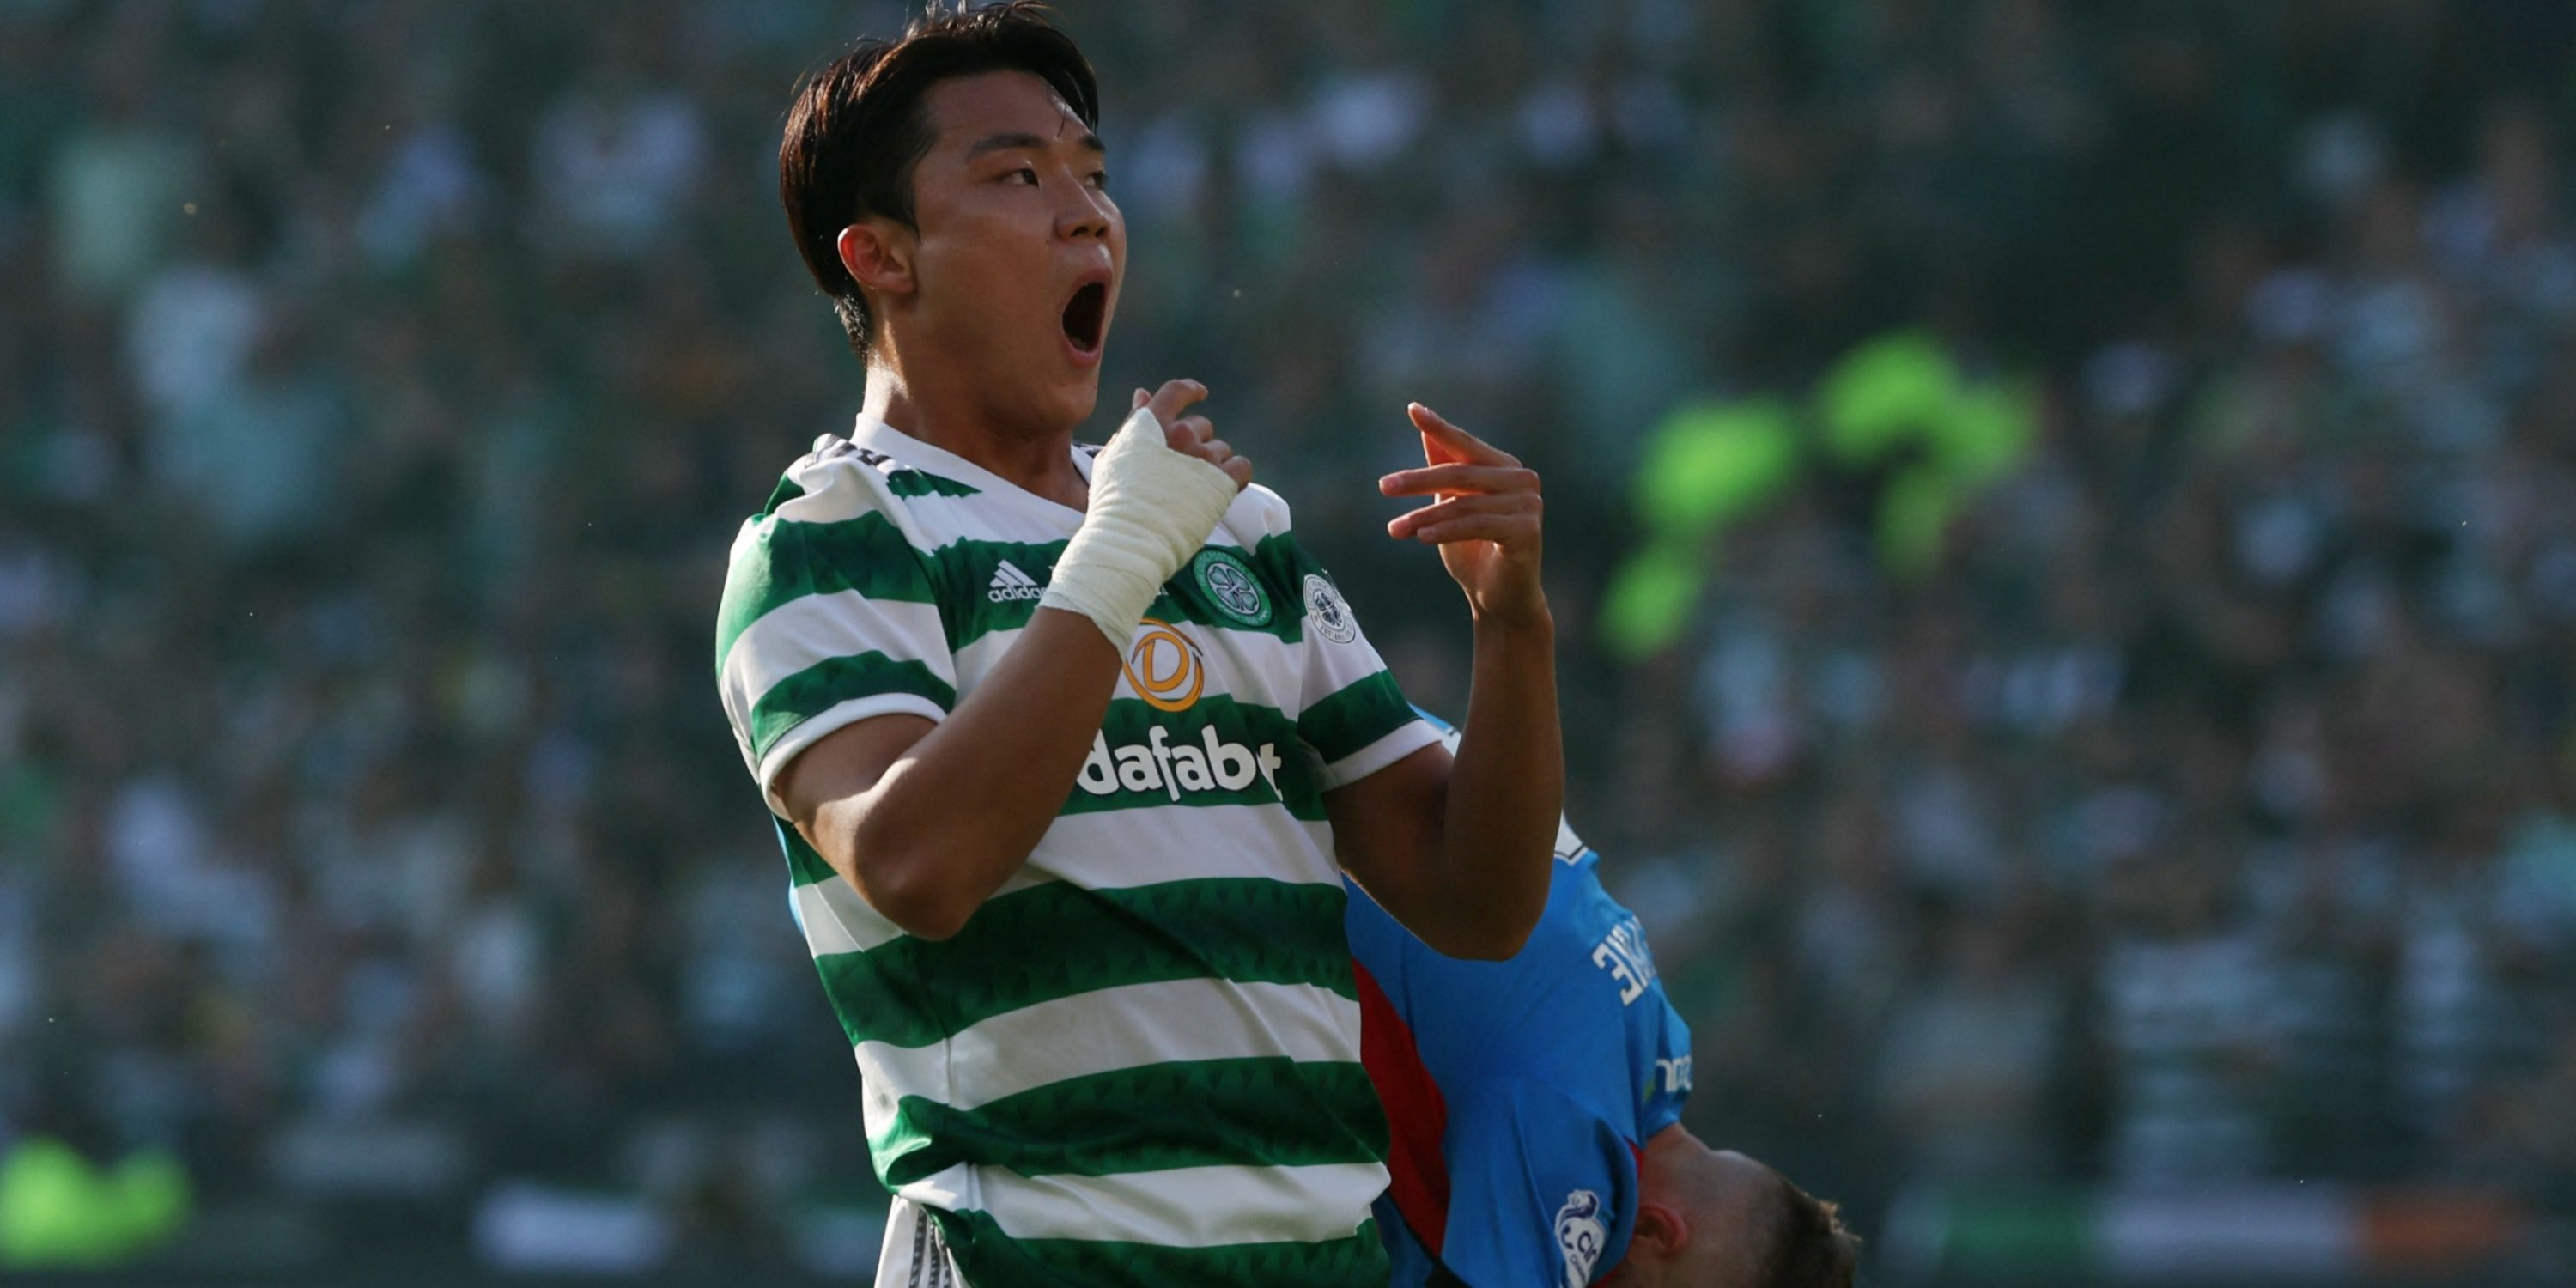 celtic could land big oh upgrade in late swoop for £4.5m+ spfl marksman